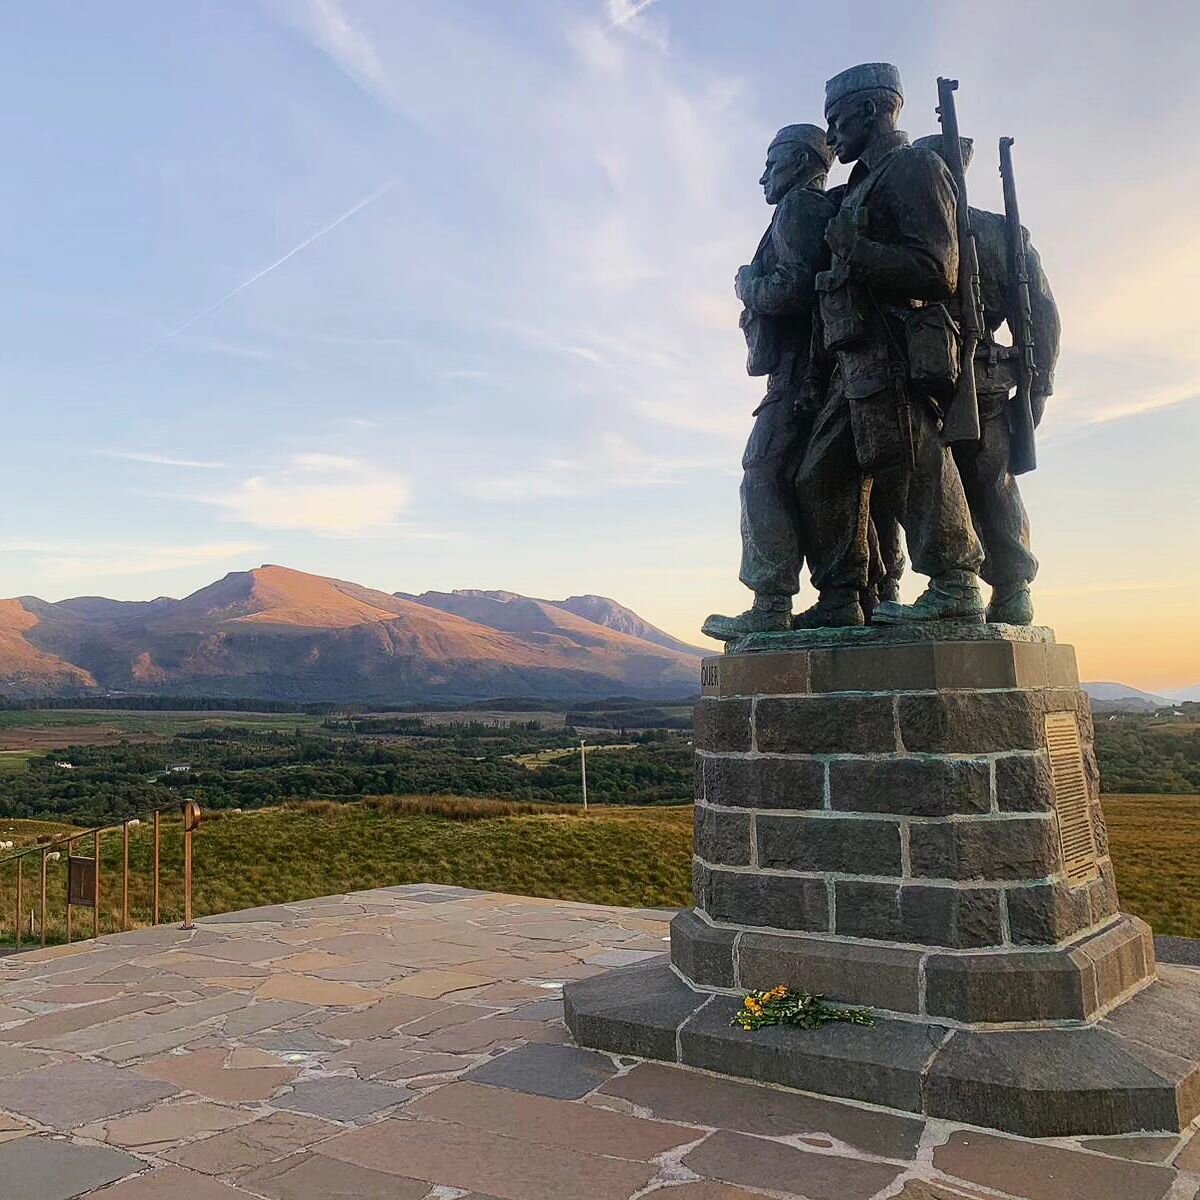 The commando memorial over looking Ben Nevis! A beautiful memorial with a gorgeous sunset to end a busy day in Scotland #scottishhighlands #scotland #commandos  #royalmarines